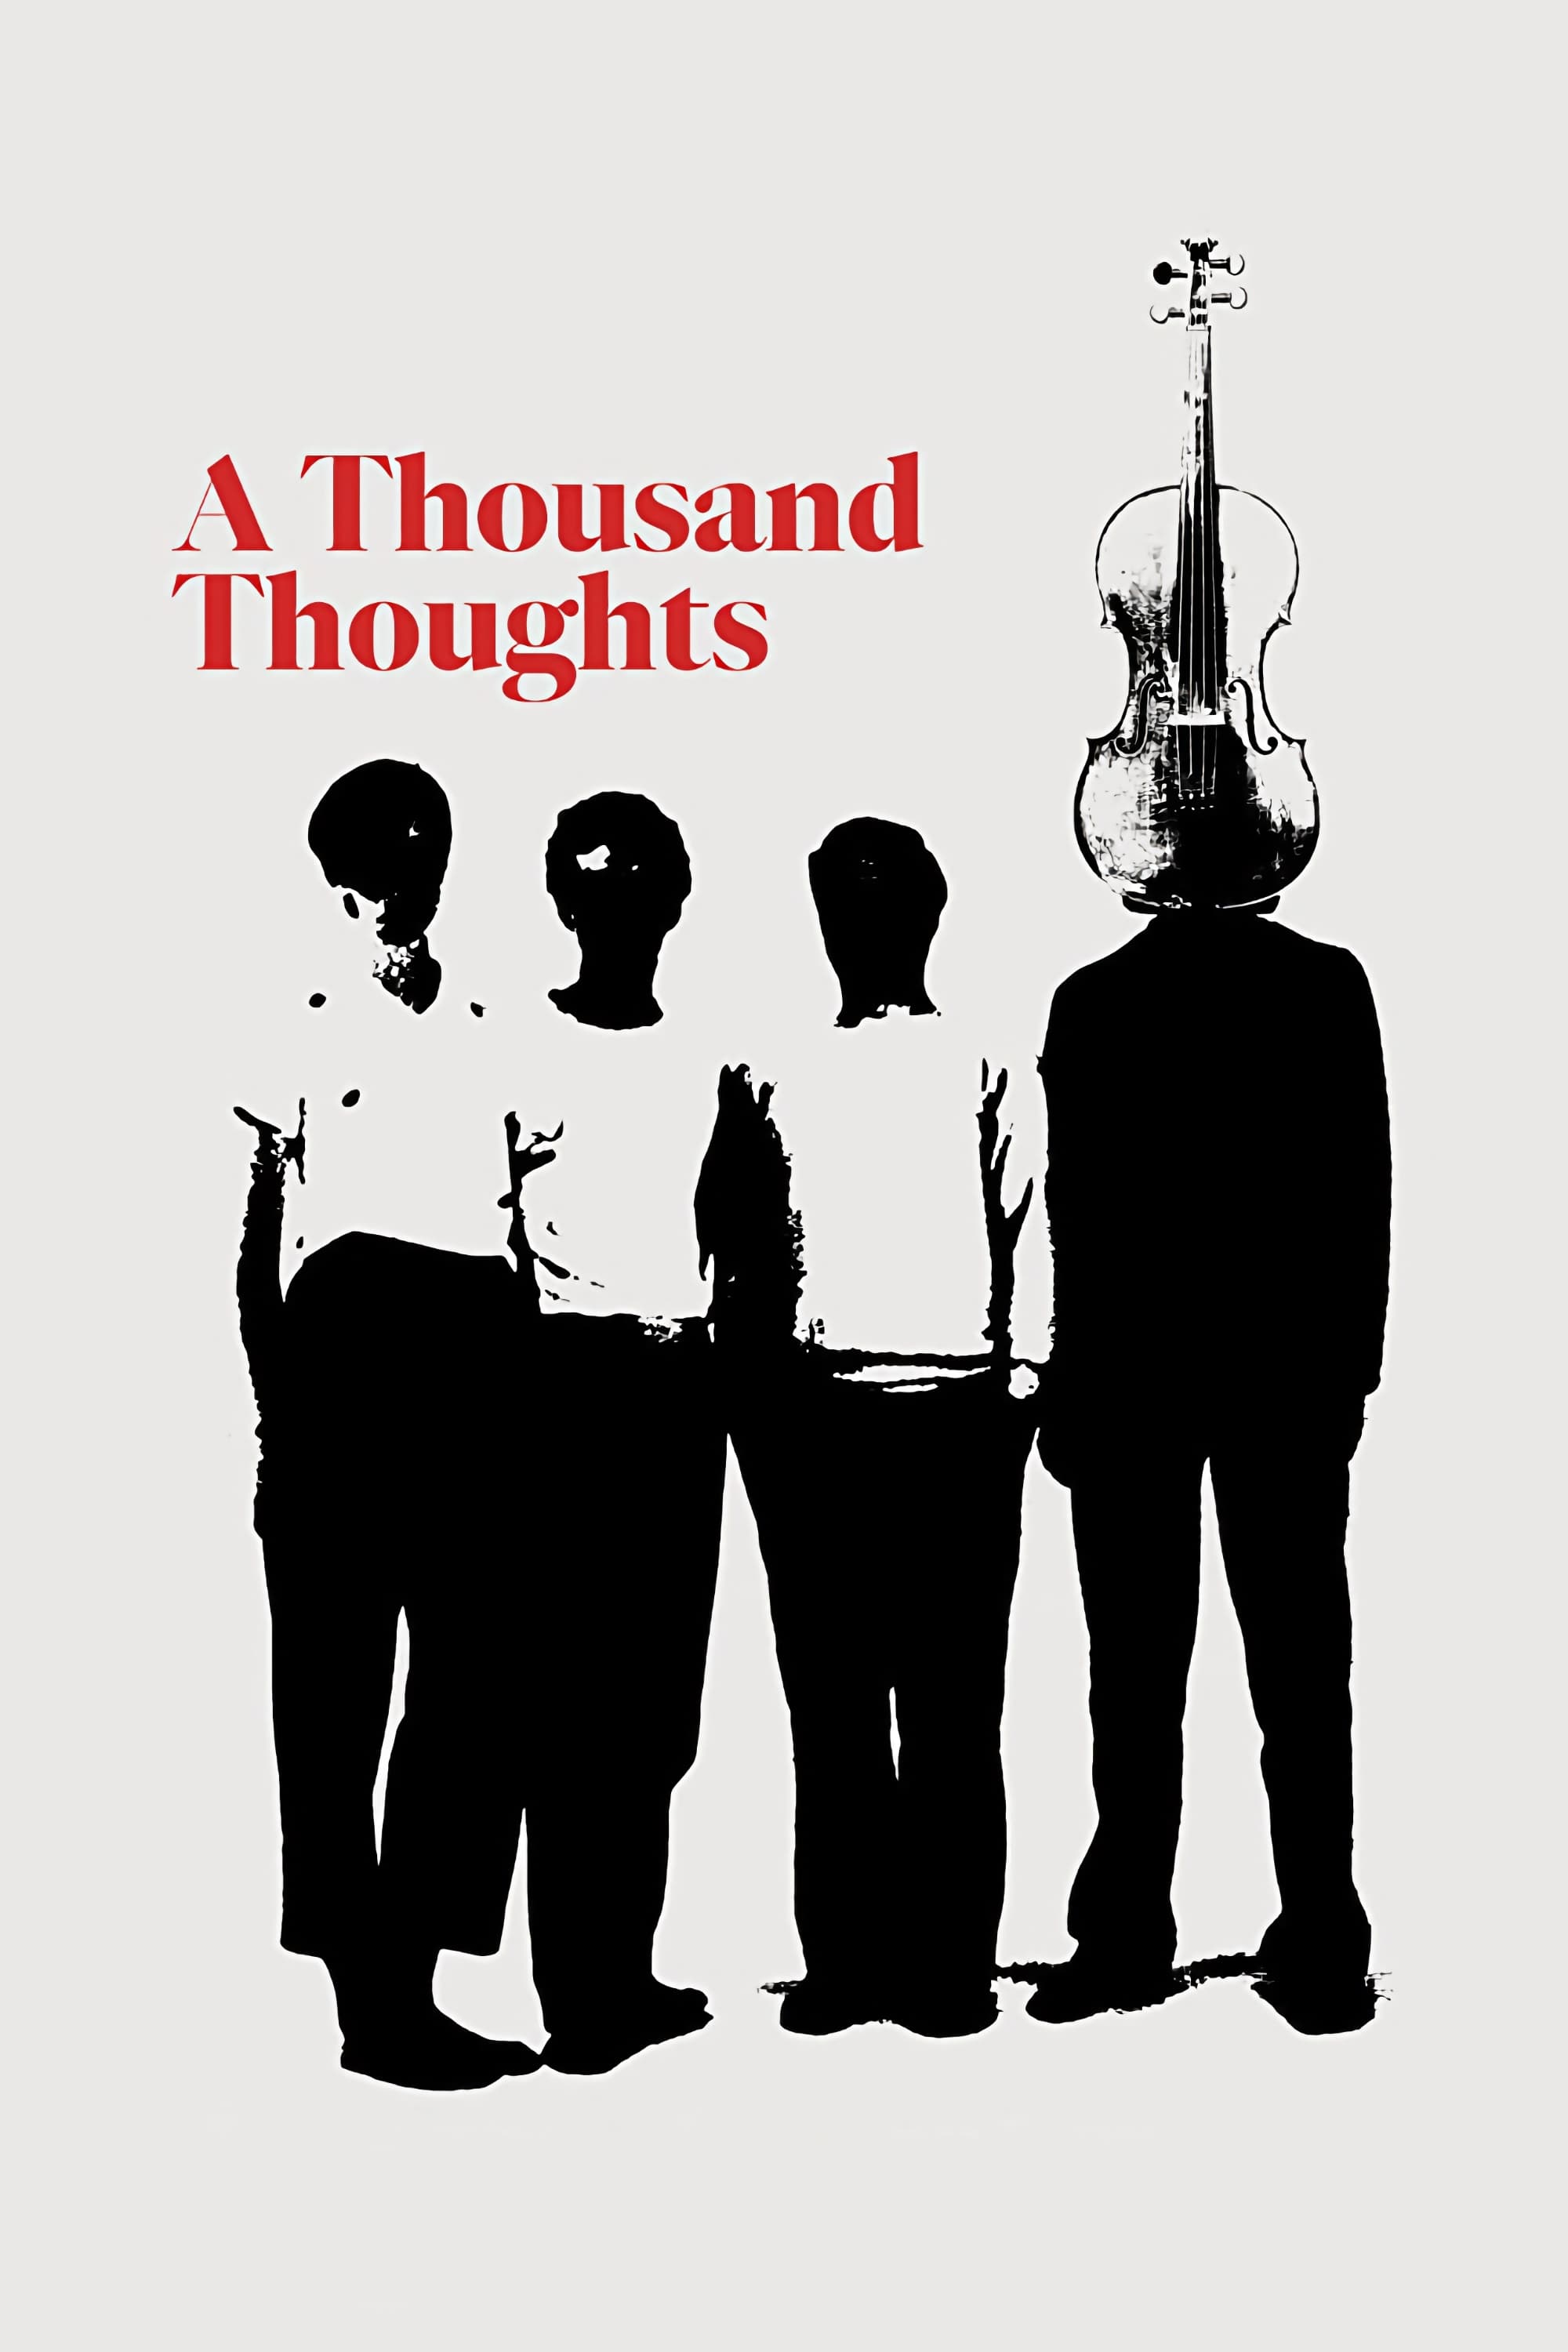 A Thousand Thoughts